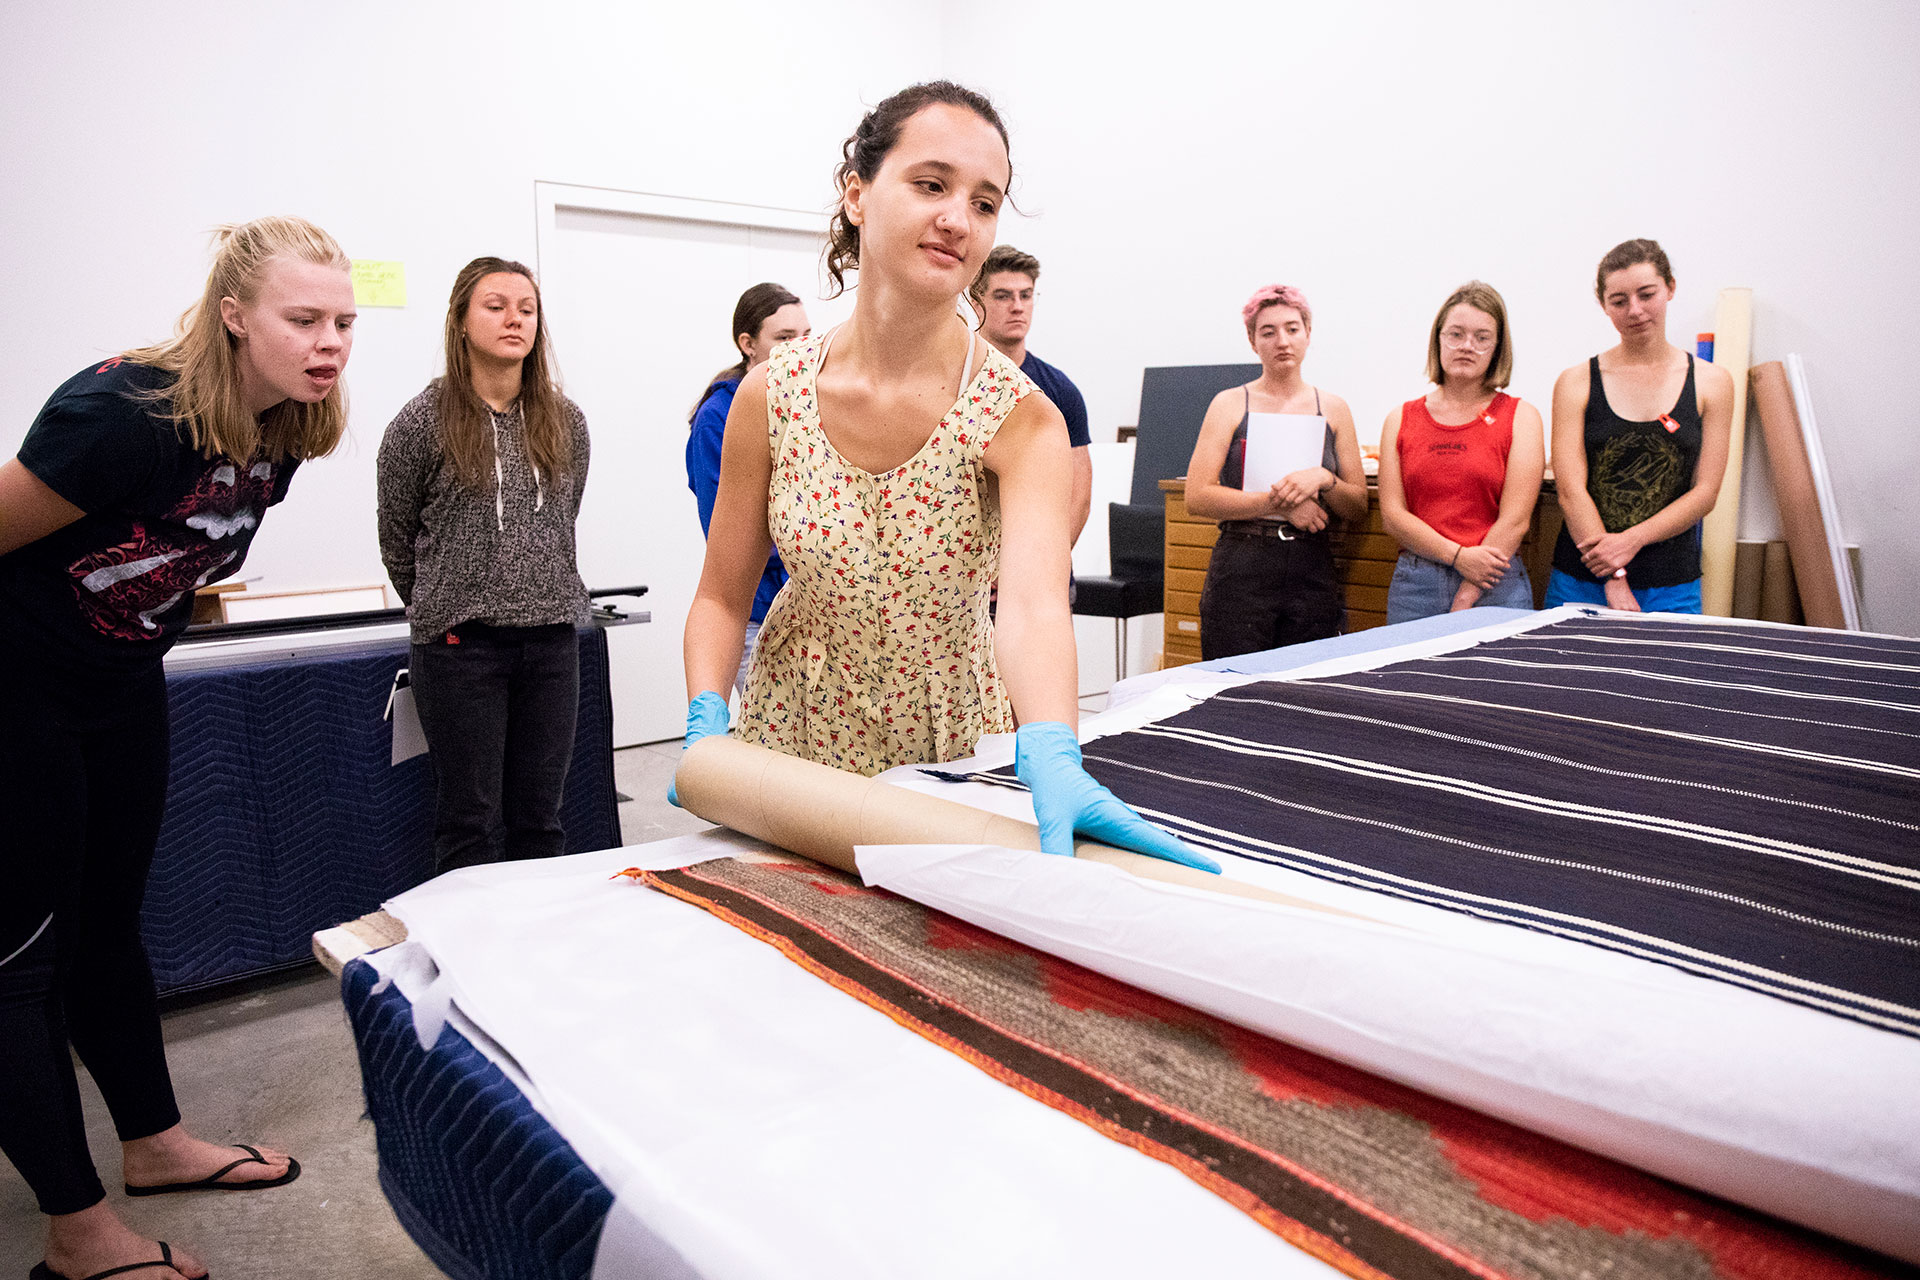 Fine Arts Center intern Amber Mustafic ’19 carefully rolls out a Navajo blanket that is in the collection at the museum so that students in Jeanne Steiner's Fiber Arts class could examine the pieces and look at their structures.